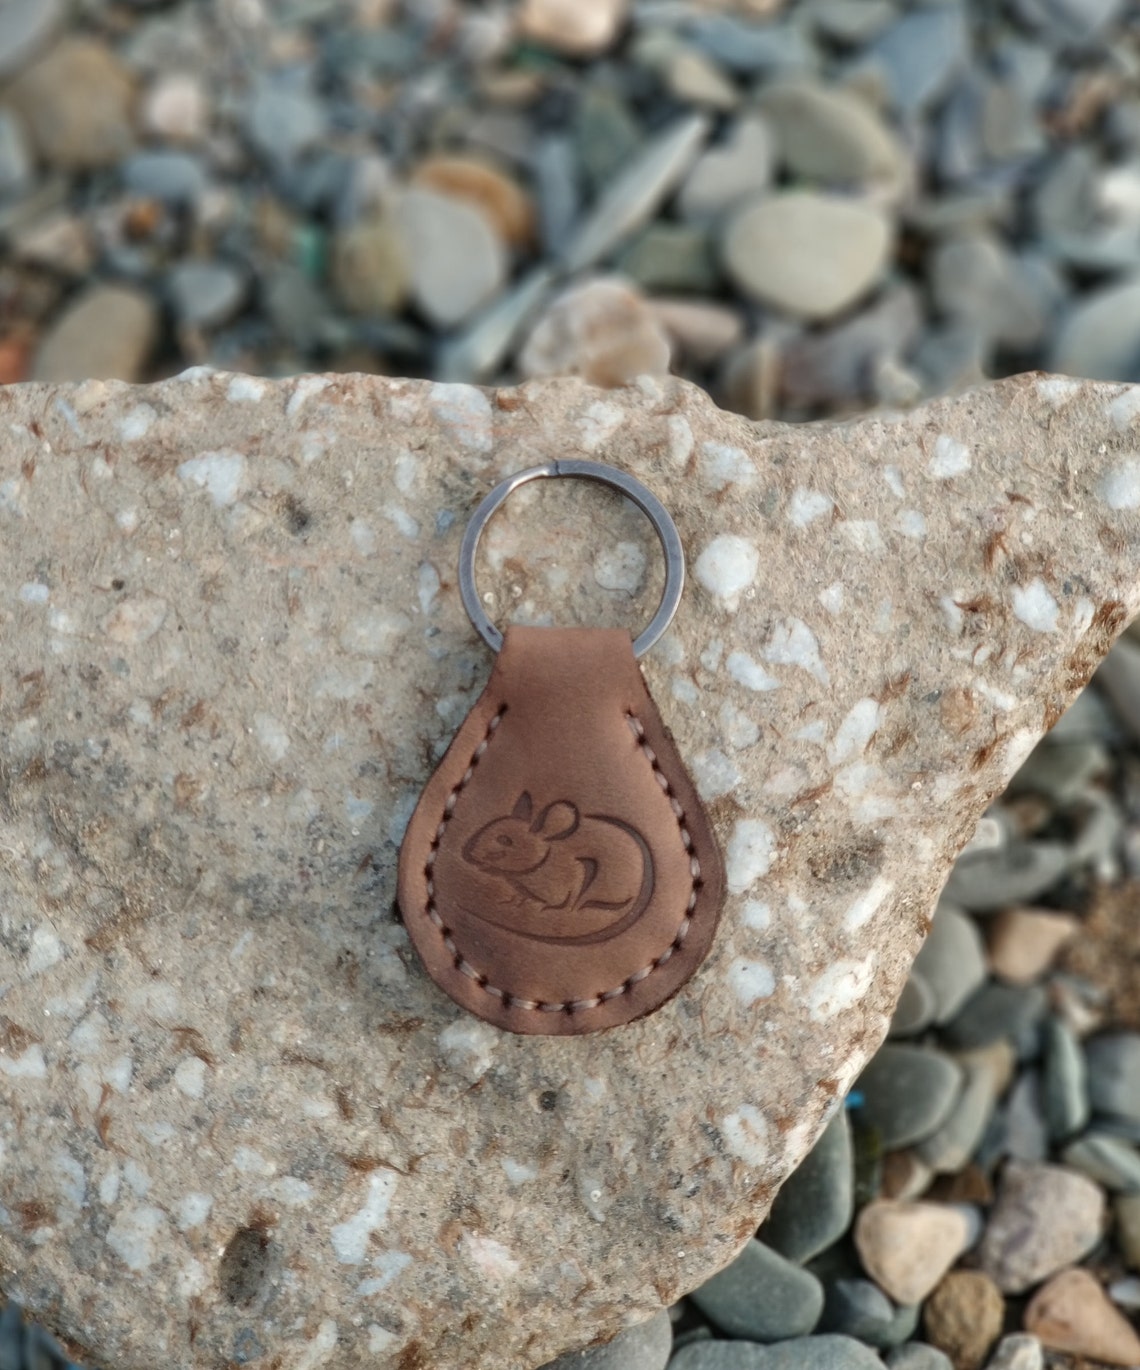 Mouse Key Chain Leather Rodent Key Ring Rat Key Ring Animal - Etsy